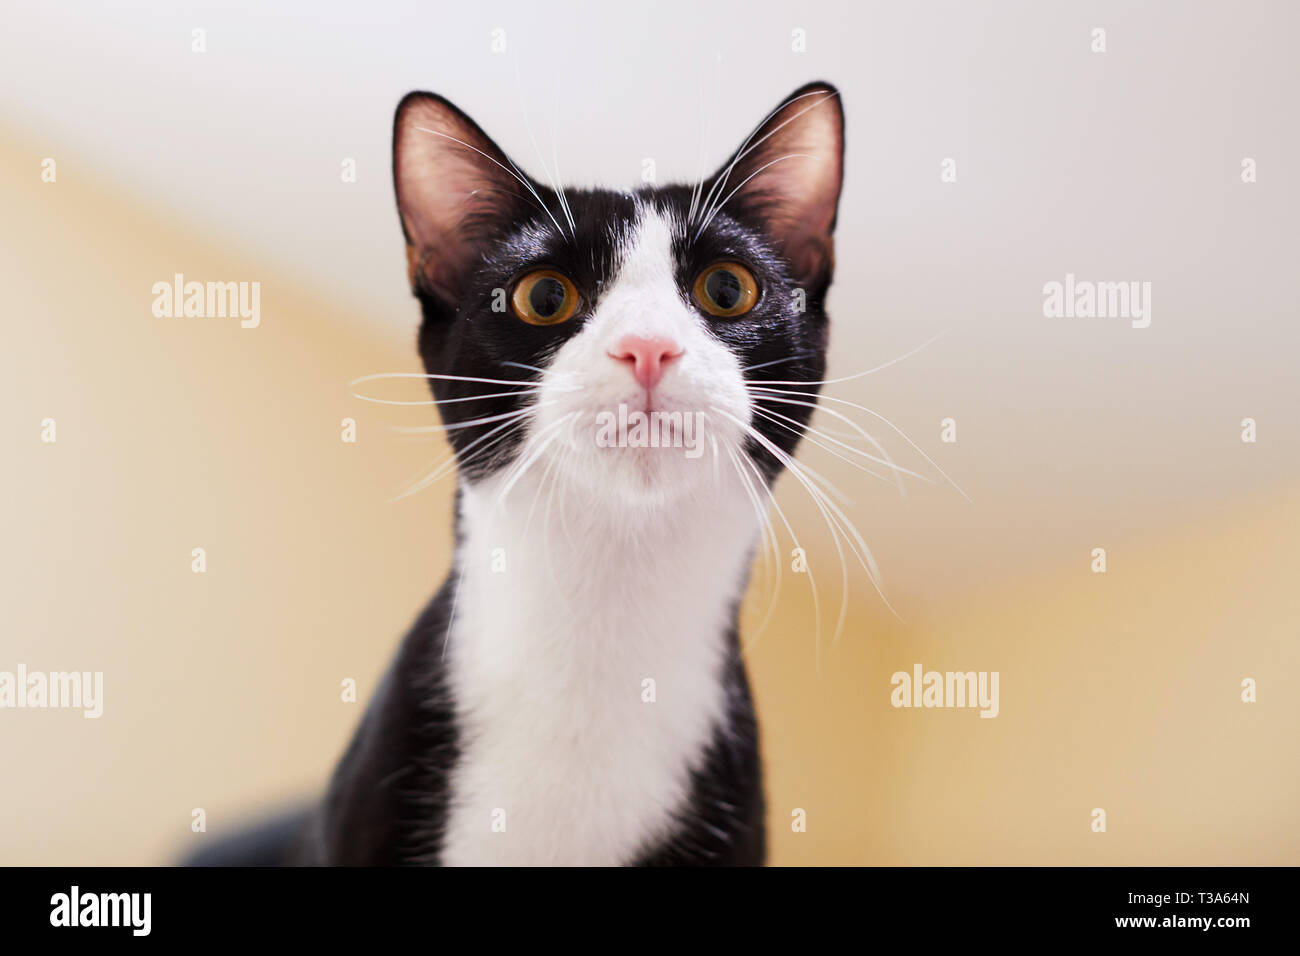 A portrait of a curious and playful black and white tuxedo kitten or young cat Stock Photo